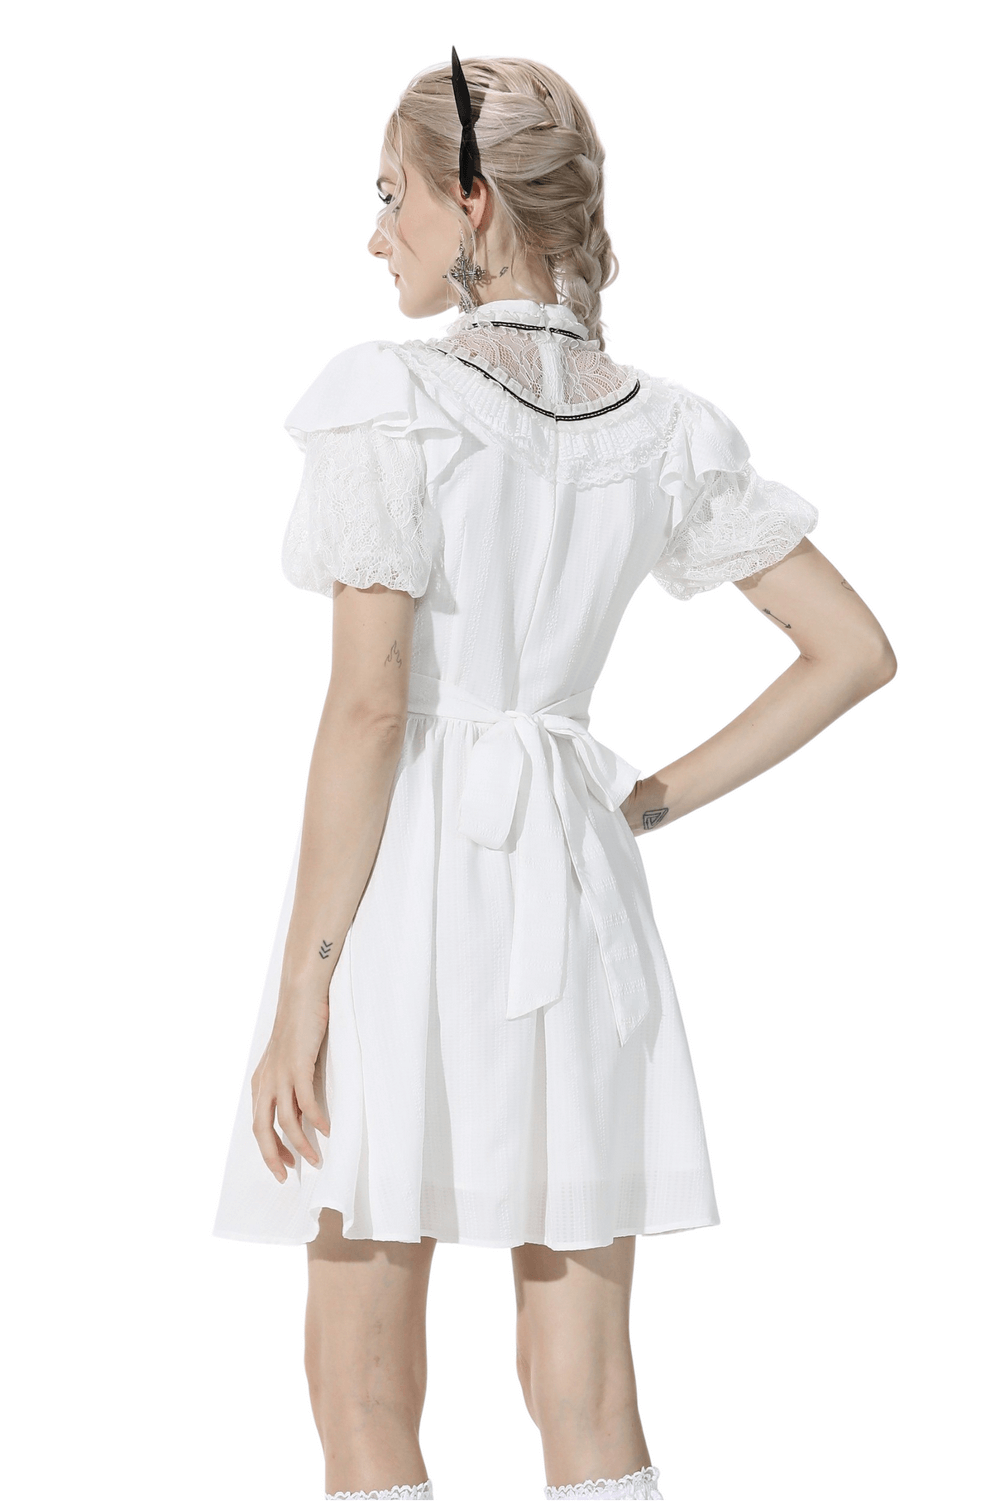 Chic Short Puff Sleeves Lace-Trimmed White Dress